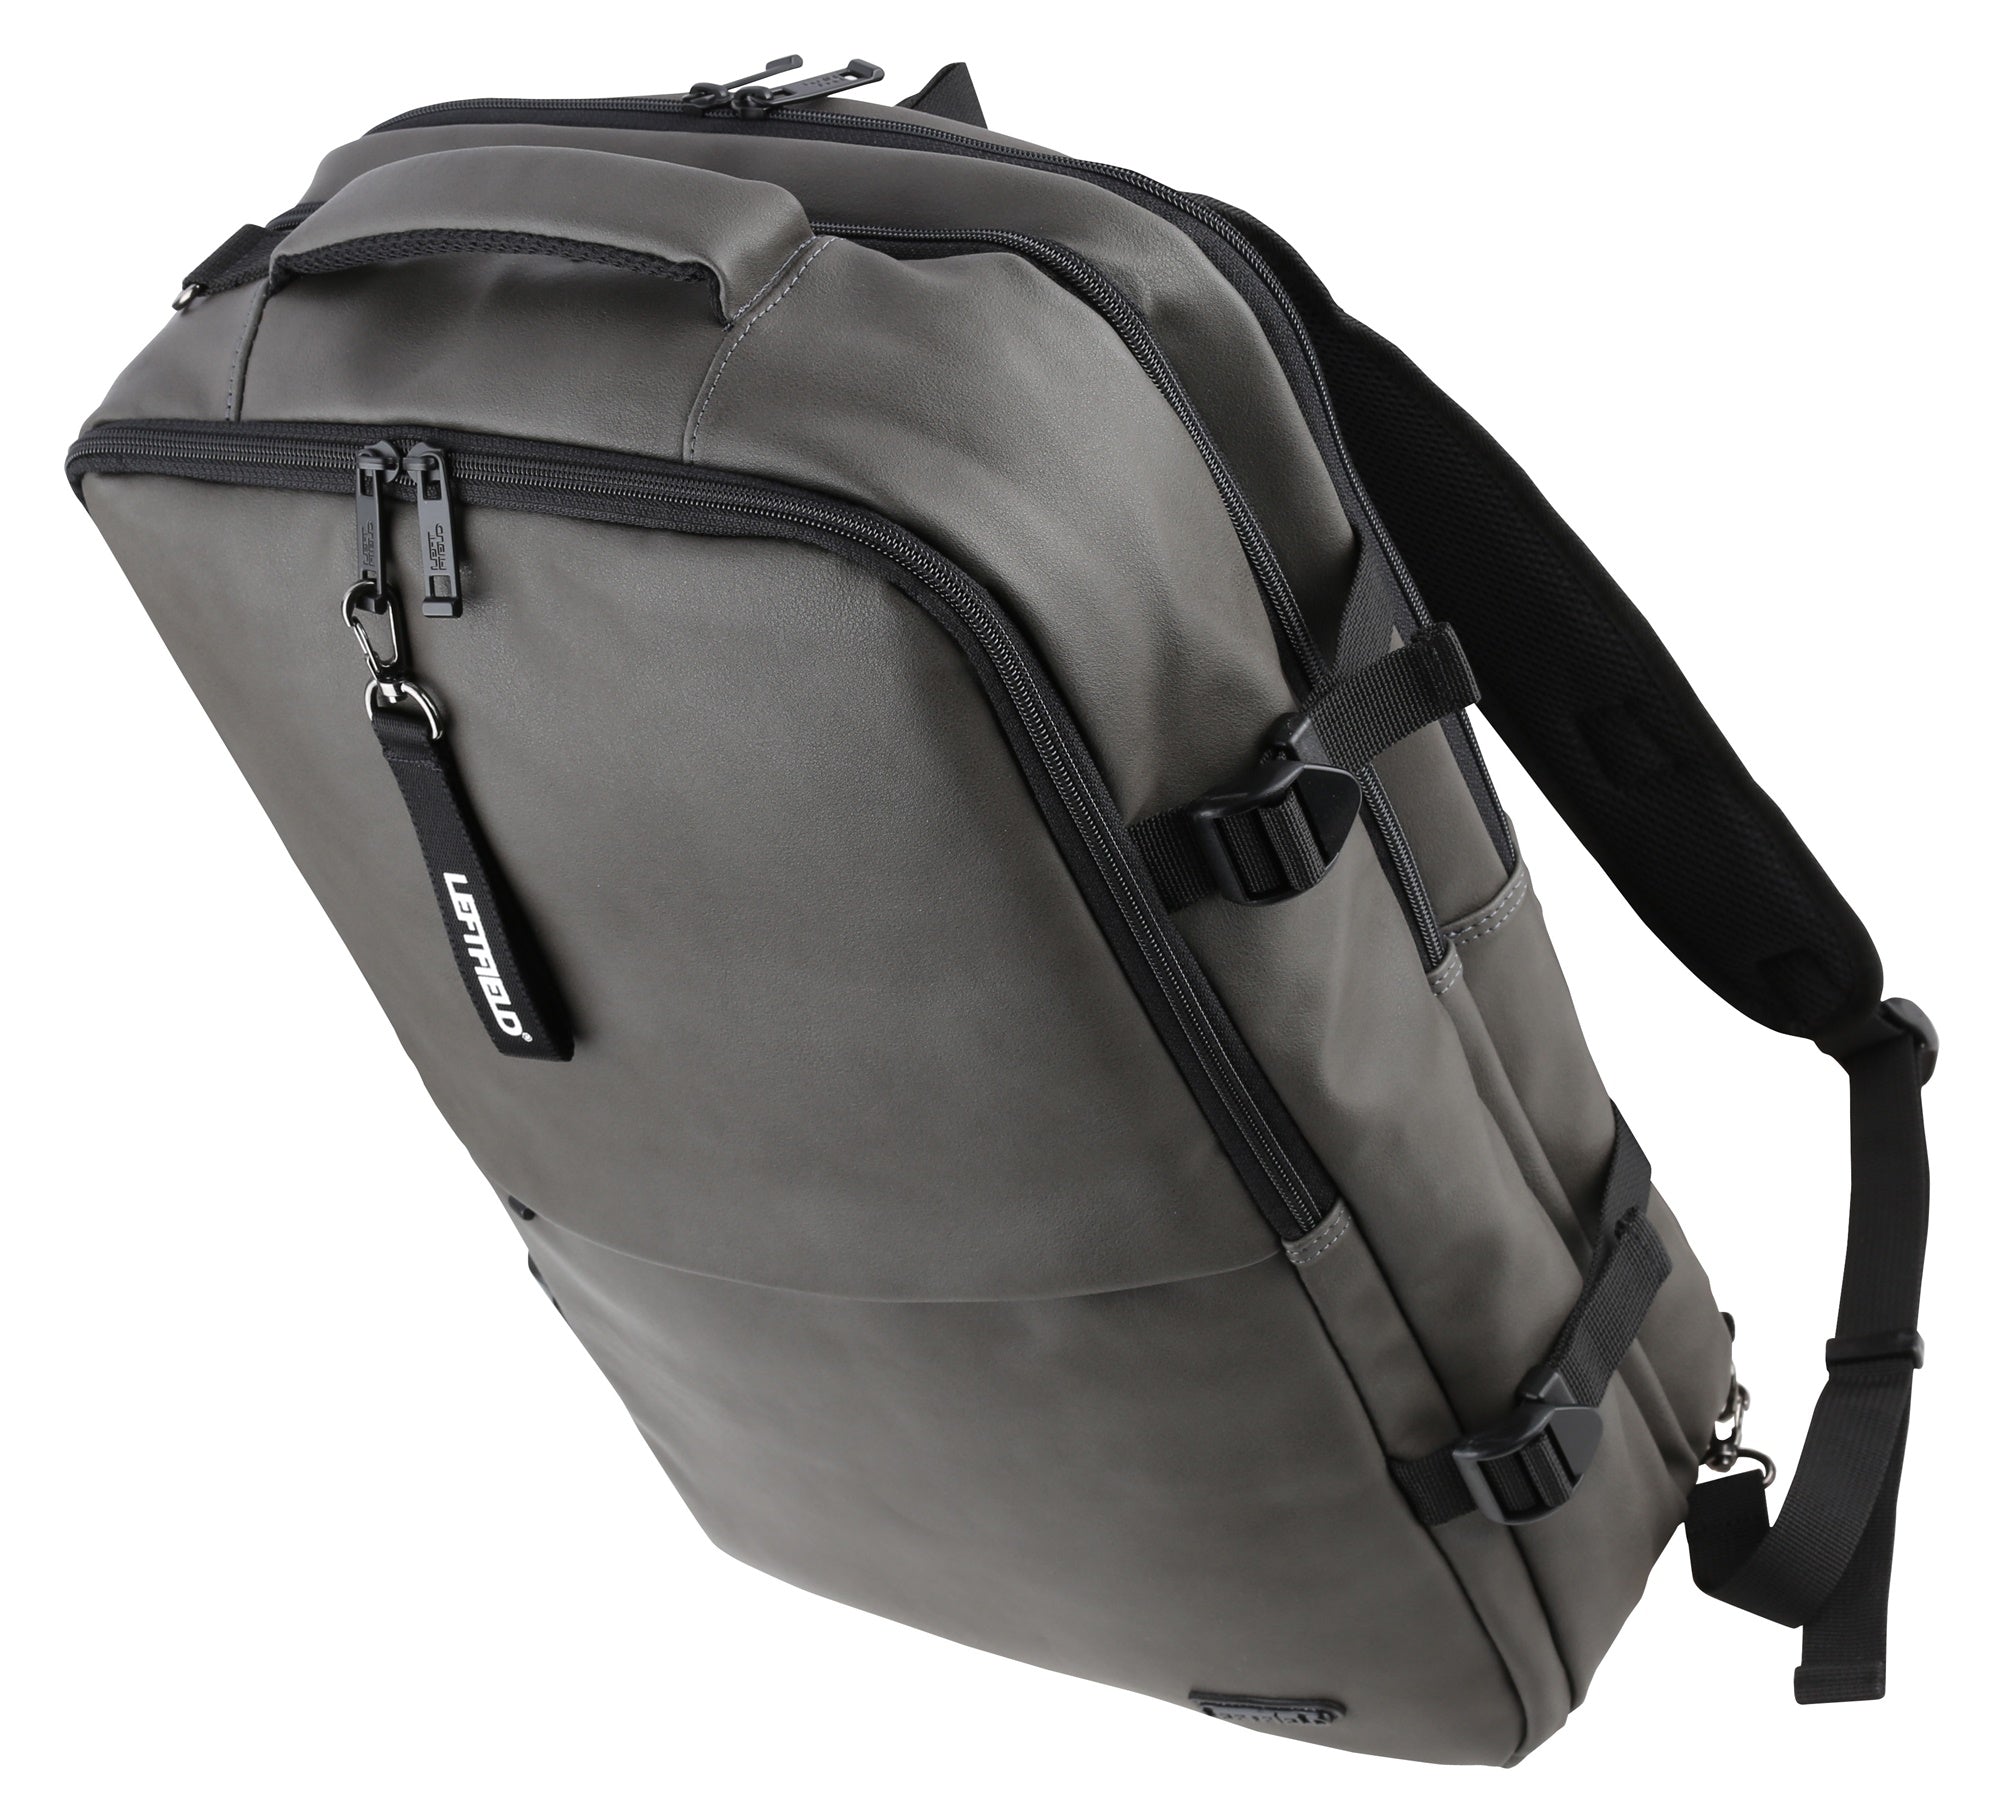 Grey Multi Synthetic Leather Suqare Laptop Backpacks